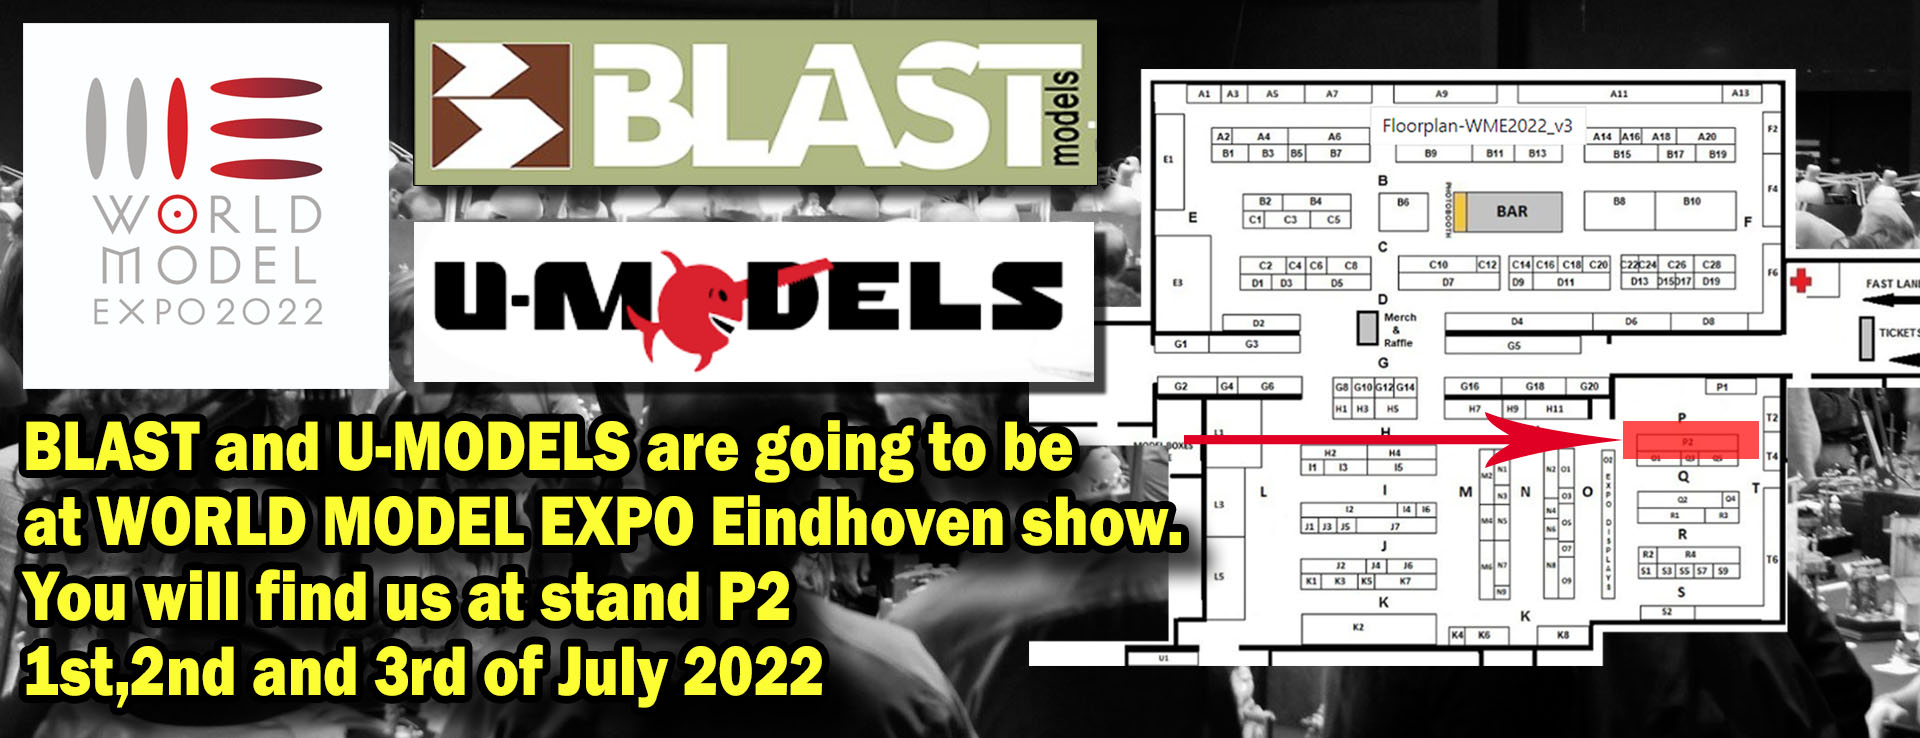 BLAST and U-MODELS at WORLD MODEL EXPO Eindhoven stand P2 1st,2nd and 3rd of July 2022